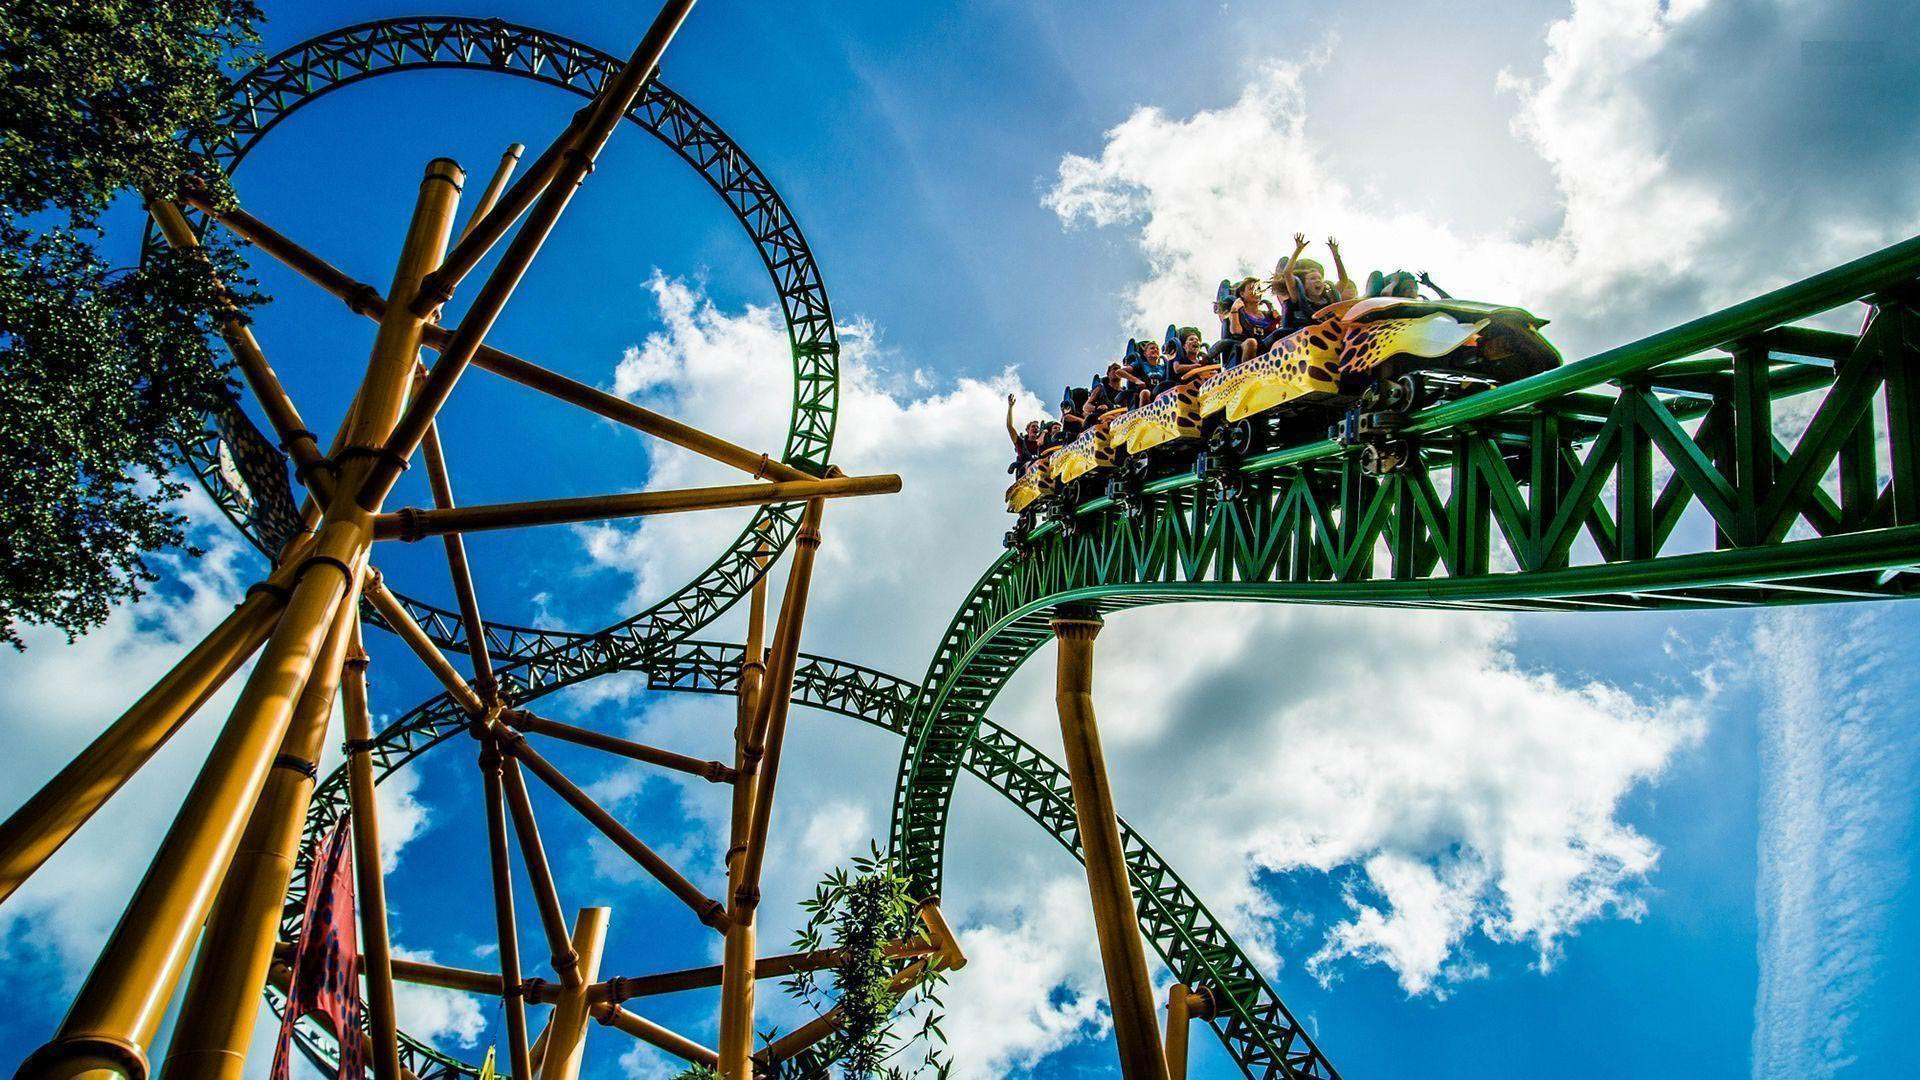 1920x1080 10+ Roller Coaster HD Wallpapers and Backgrounds